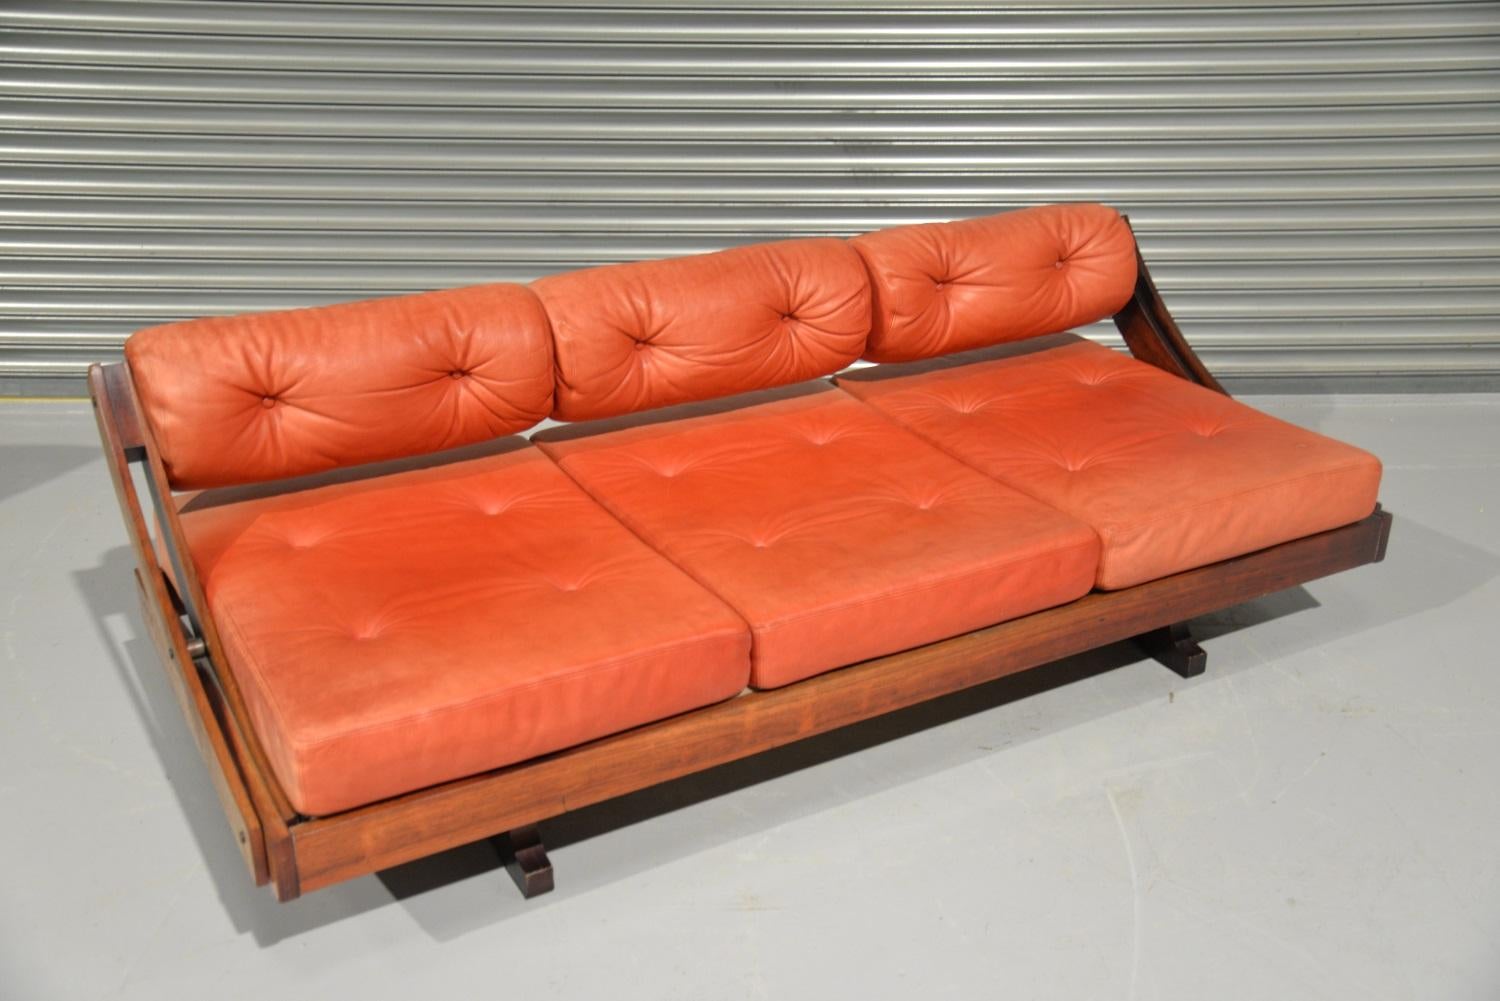 Leather Gianni Songia Daybed/Sofa Designed for Sormani of Italy, 1963 For Sale